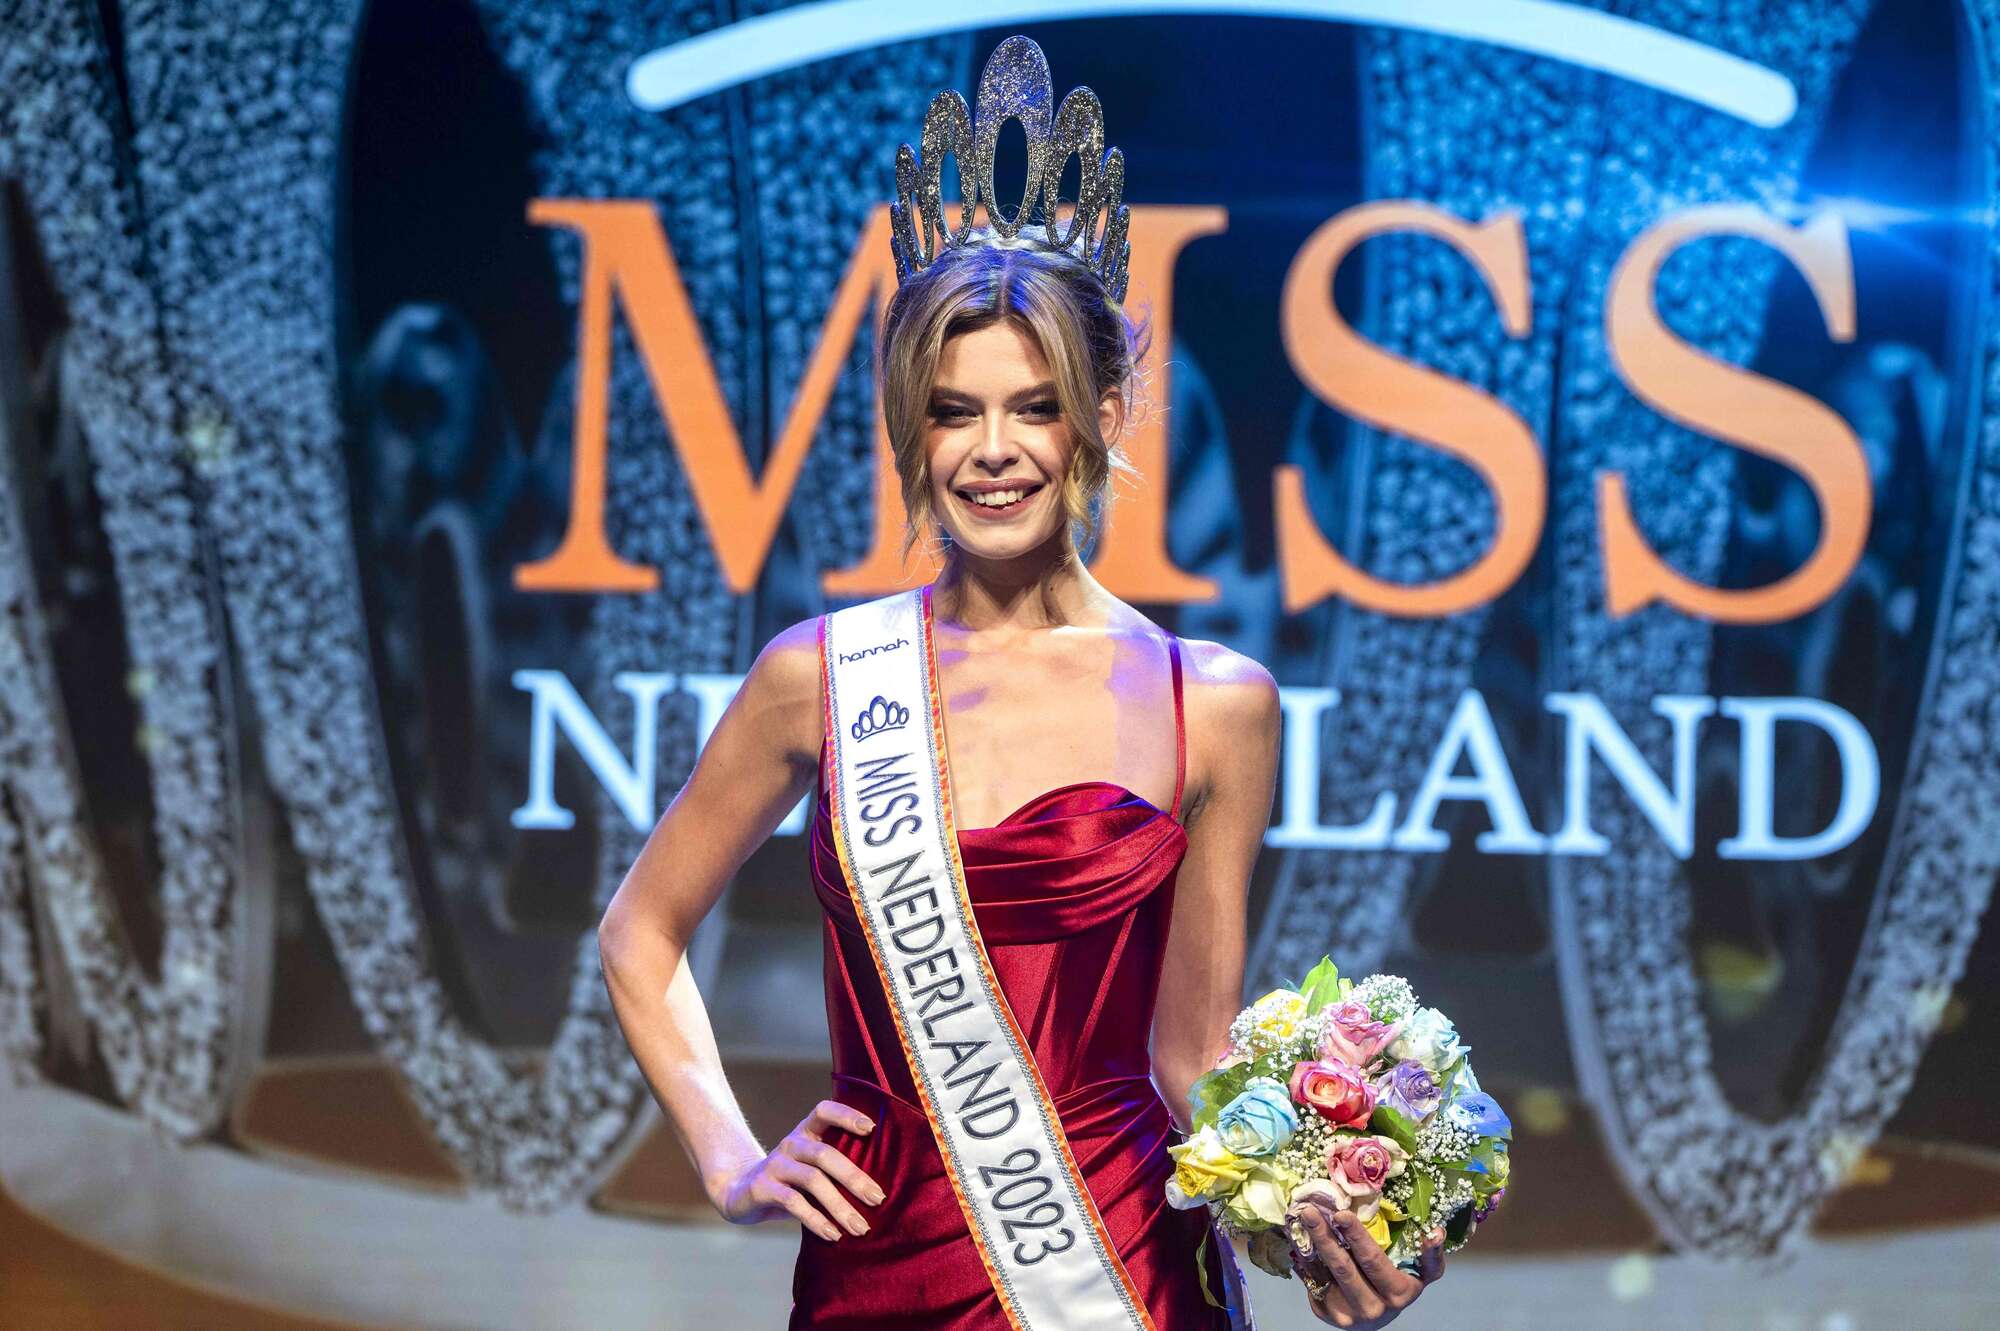 Trans woman wins Miss Netherlands for first time The East African